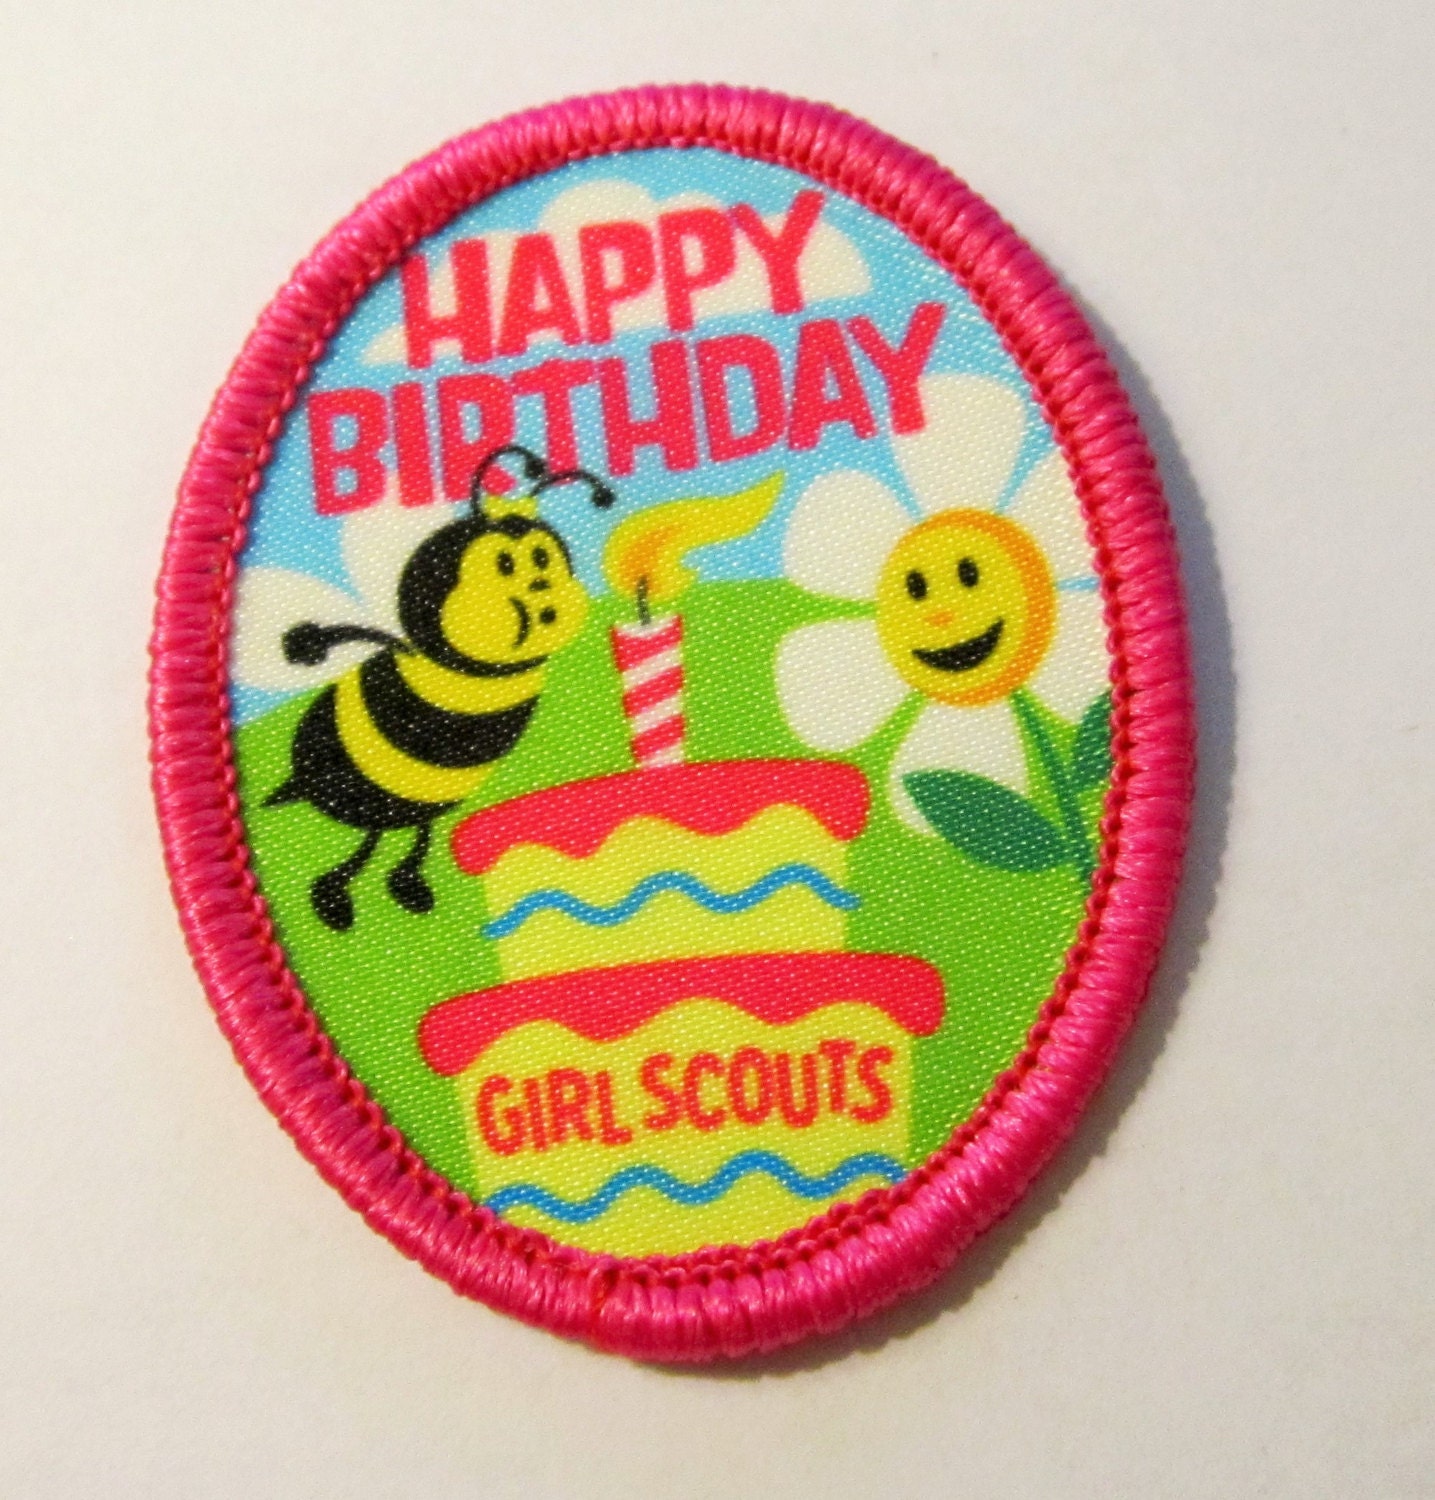 Girl Scout Fun Patch Happy Birthday by AllThingsGirlScout on Etsy